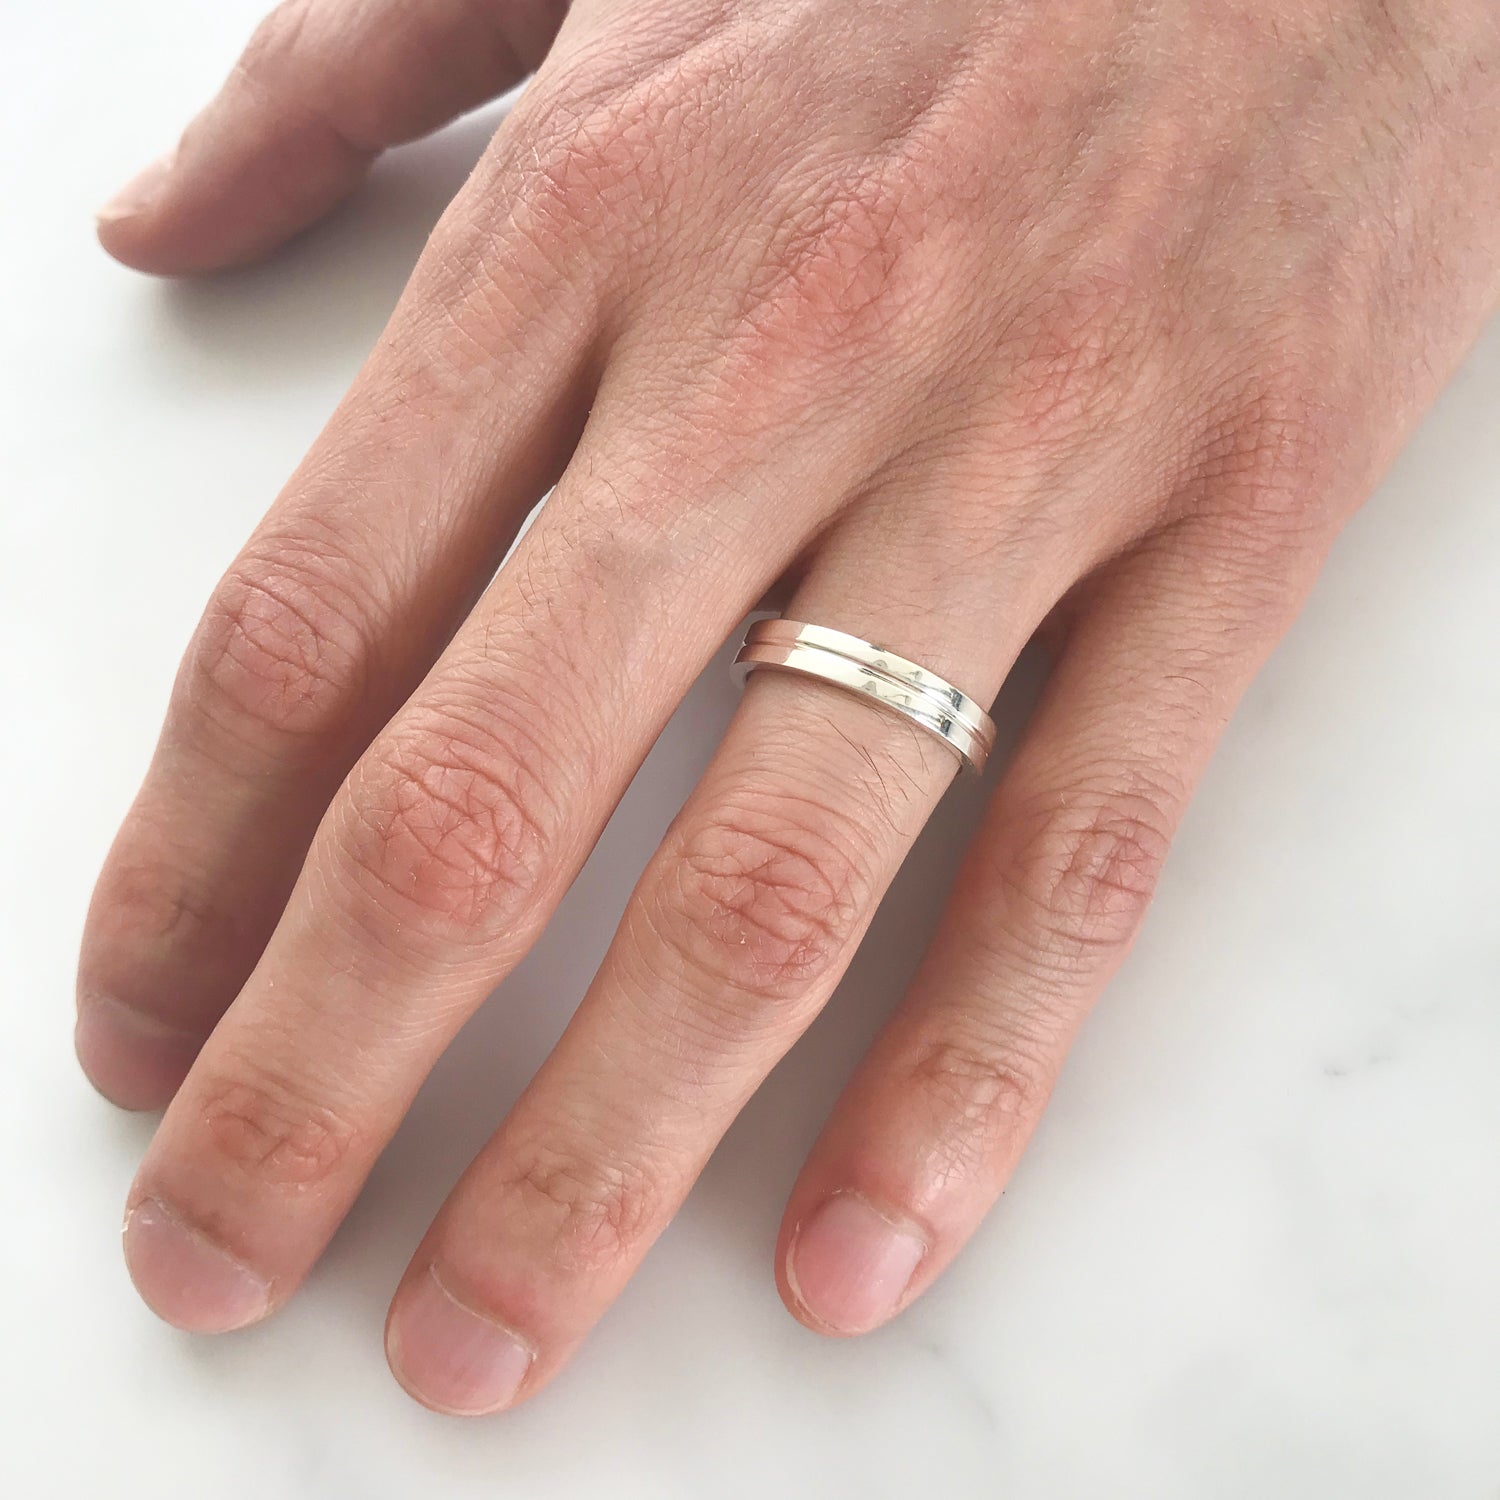 Why do some married men put their ring on the right hand instead of the  left one? - Quora